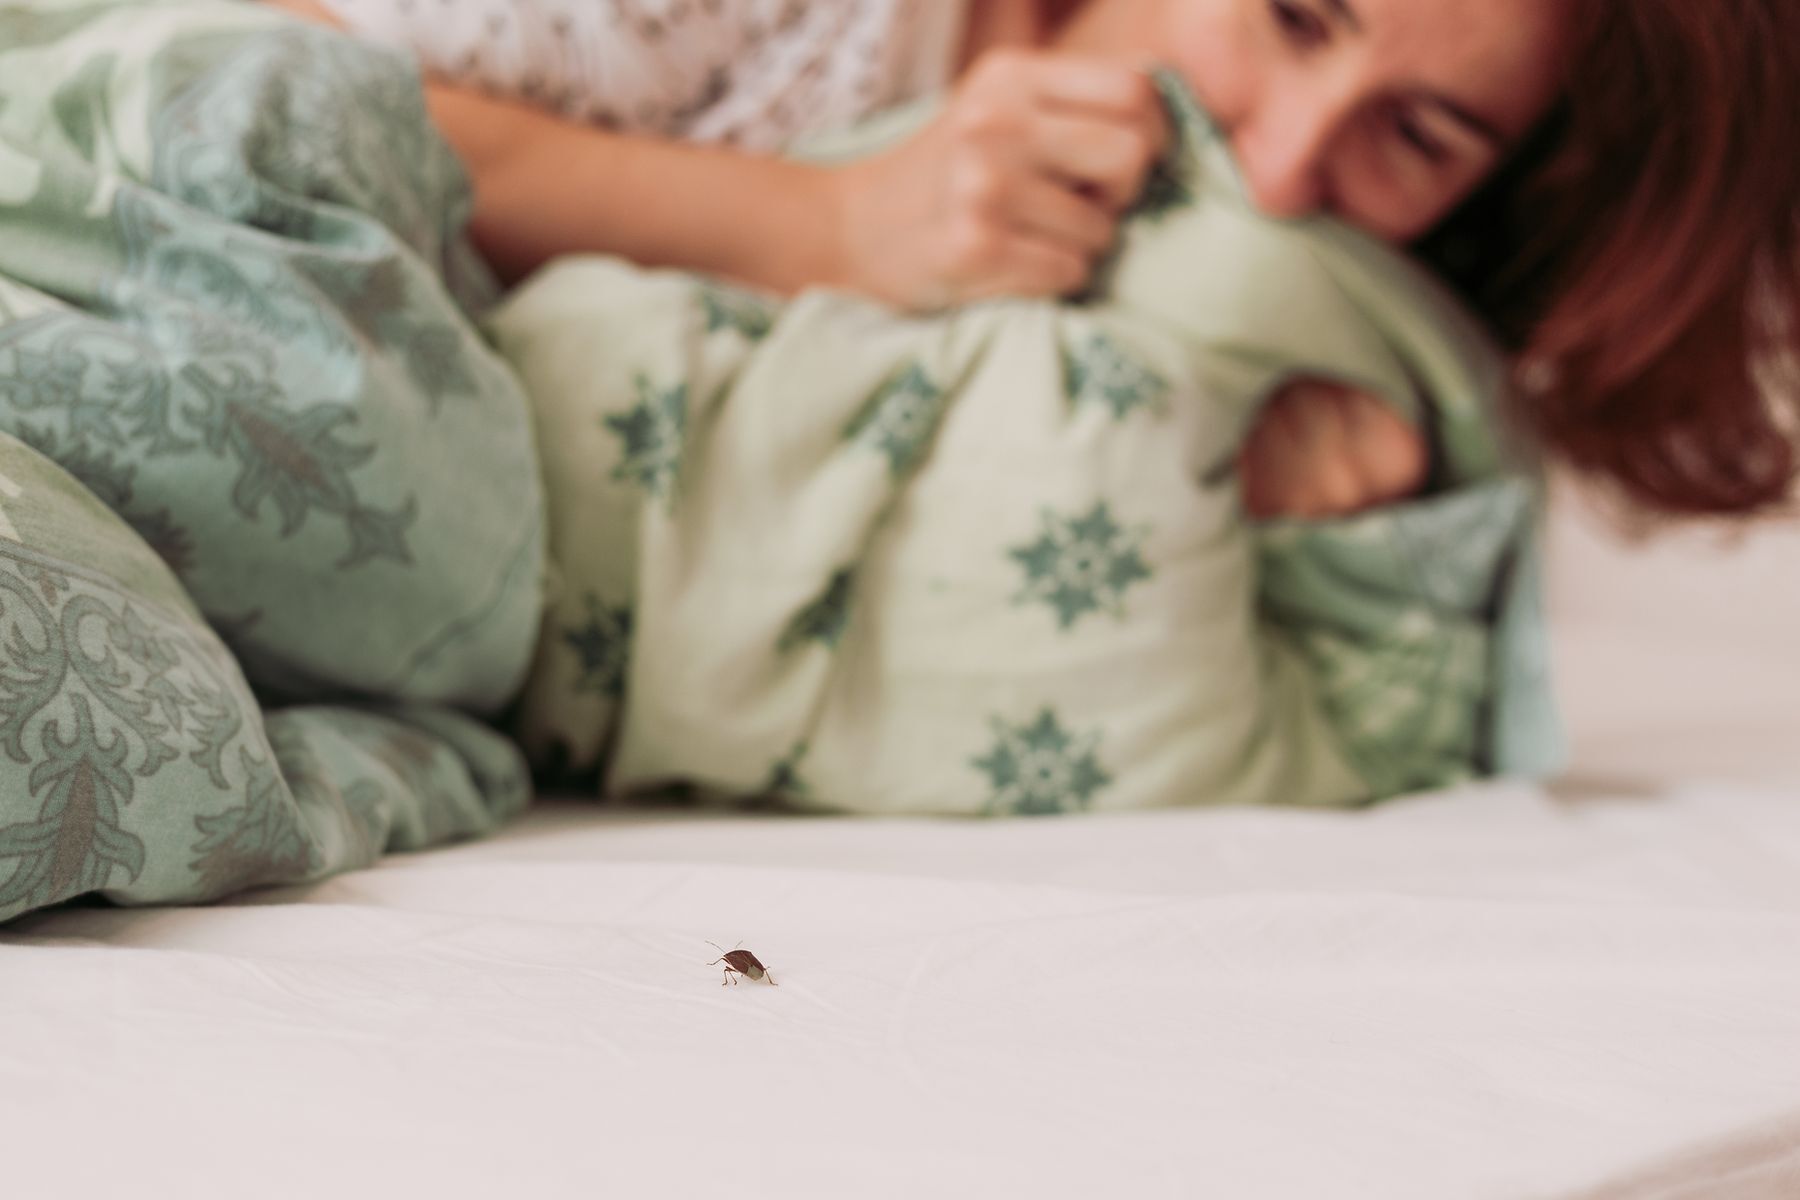 15 mind blowing facts about bedbugs